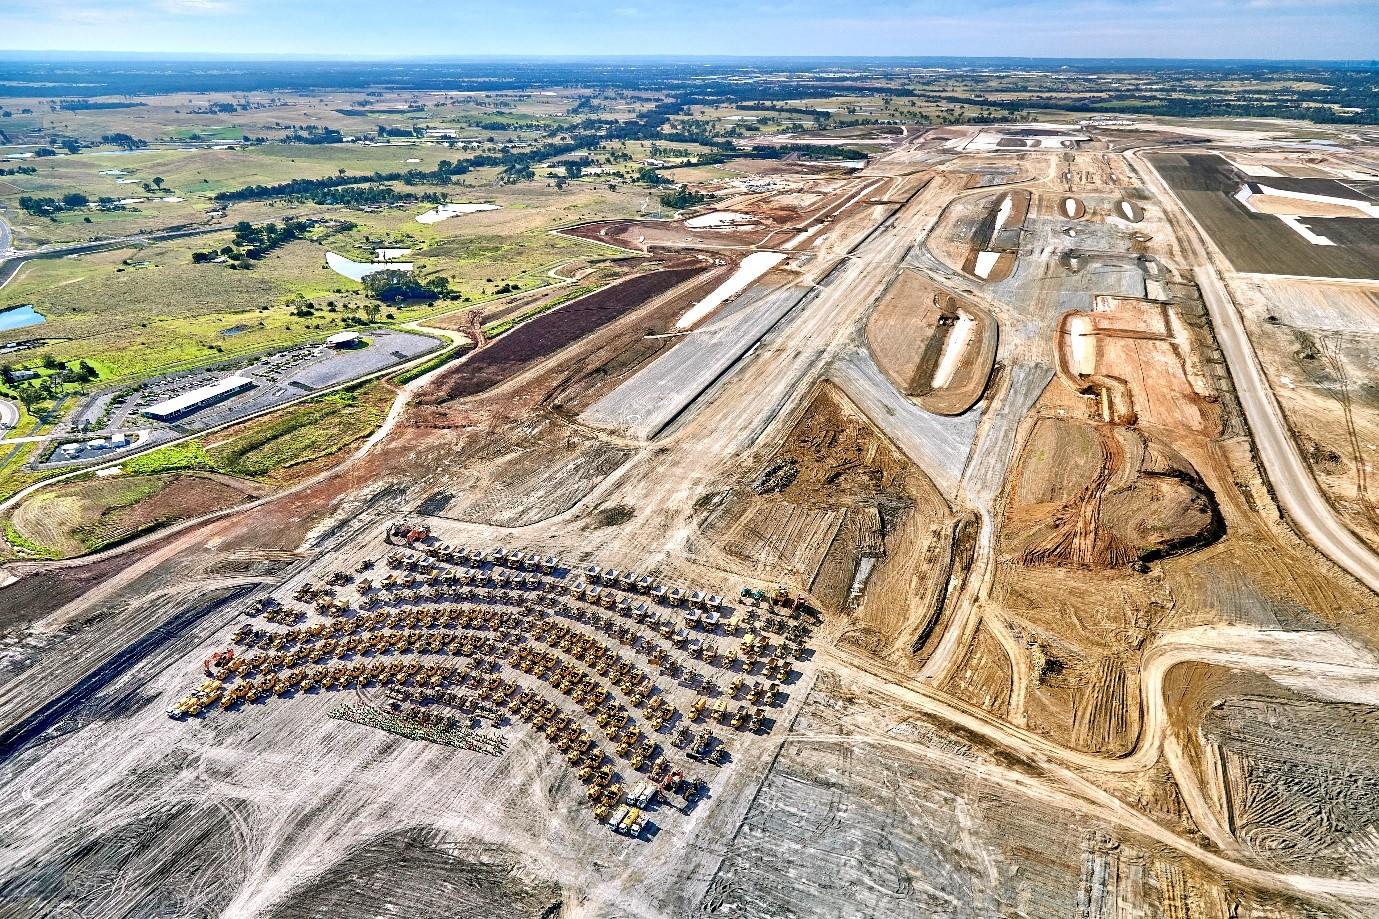 Aerial picture of plant equipment grouped together in a staged photograph celebrating the end of bulk earthworks. In the background, the outline of a runway and taxiways can be seen.